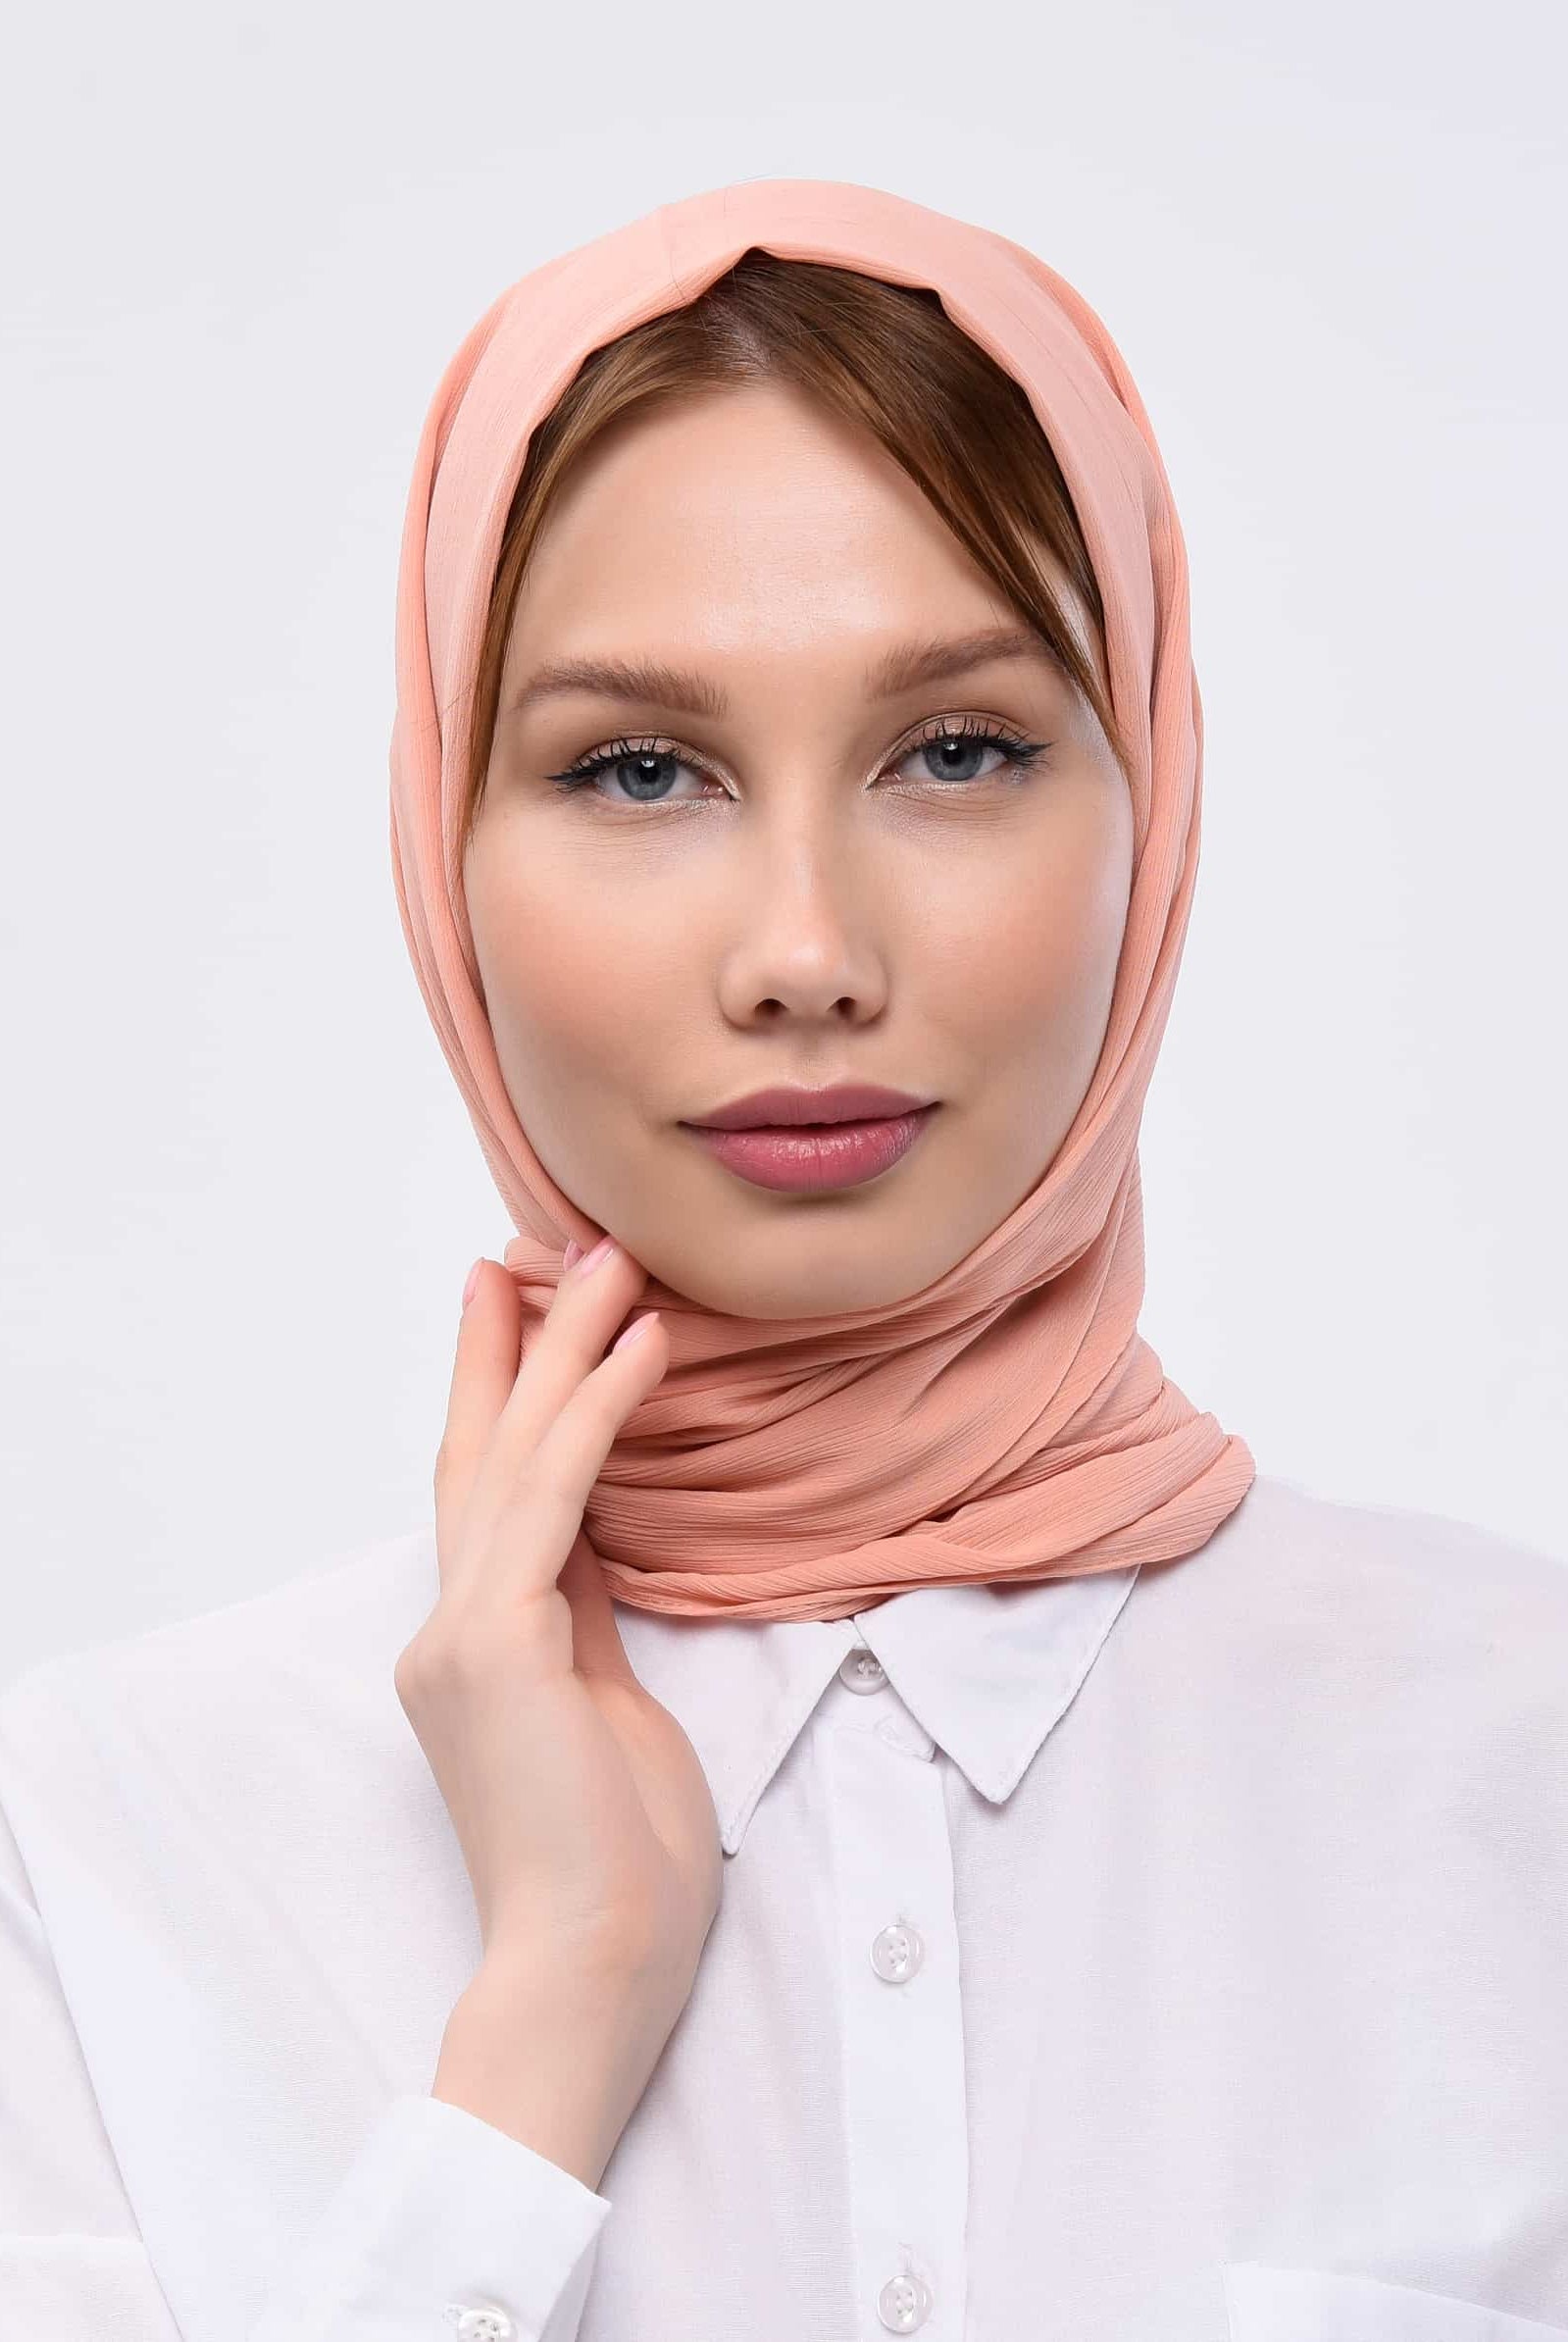 Peach pink scarf has been worn by a lady